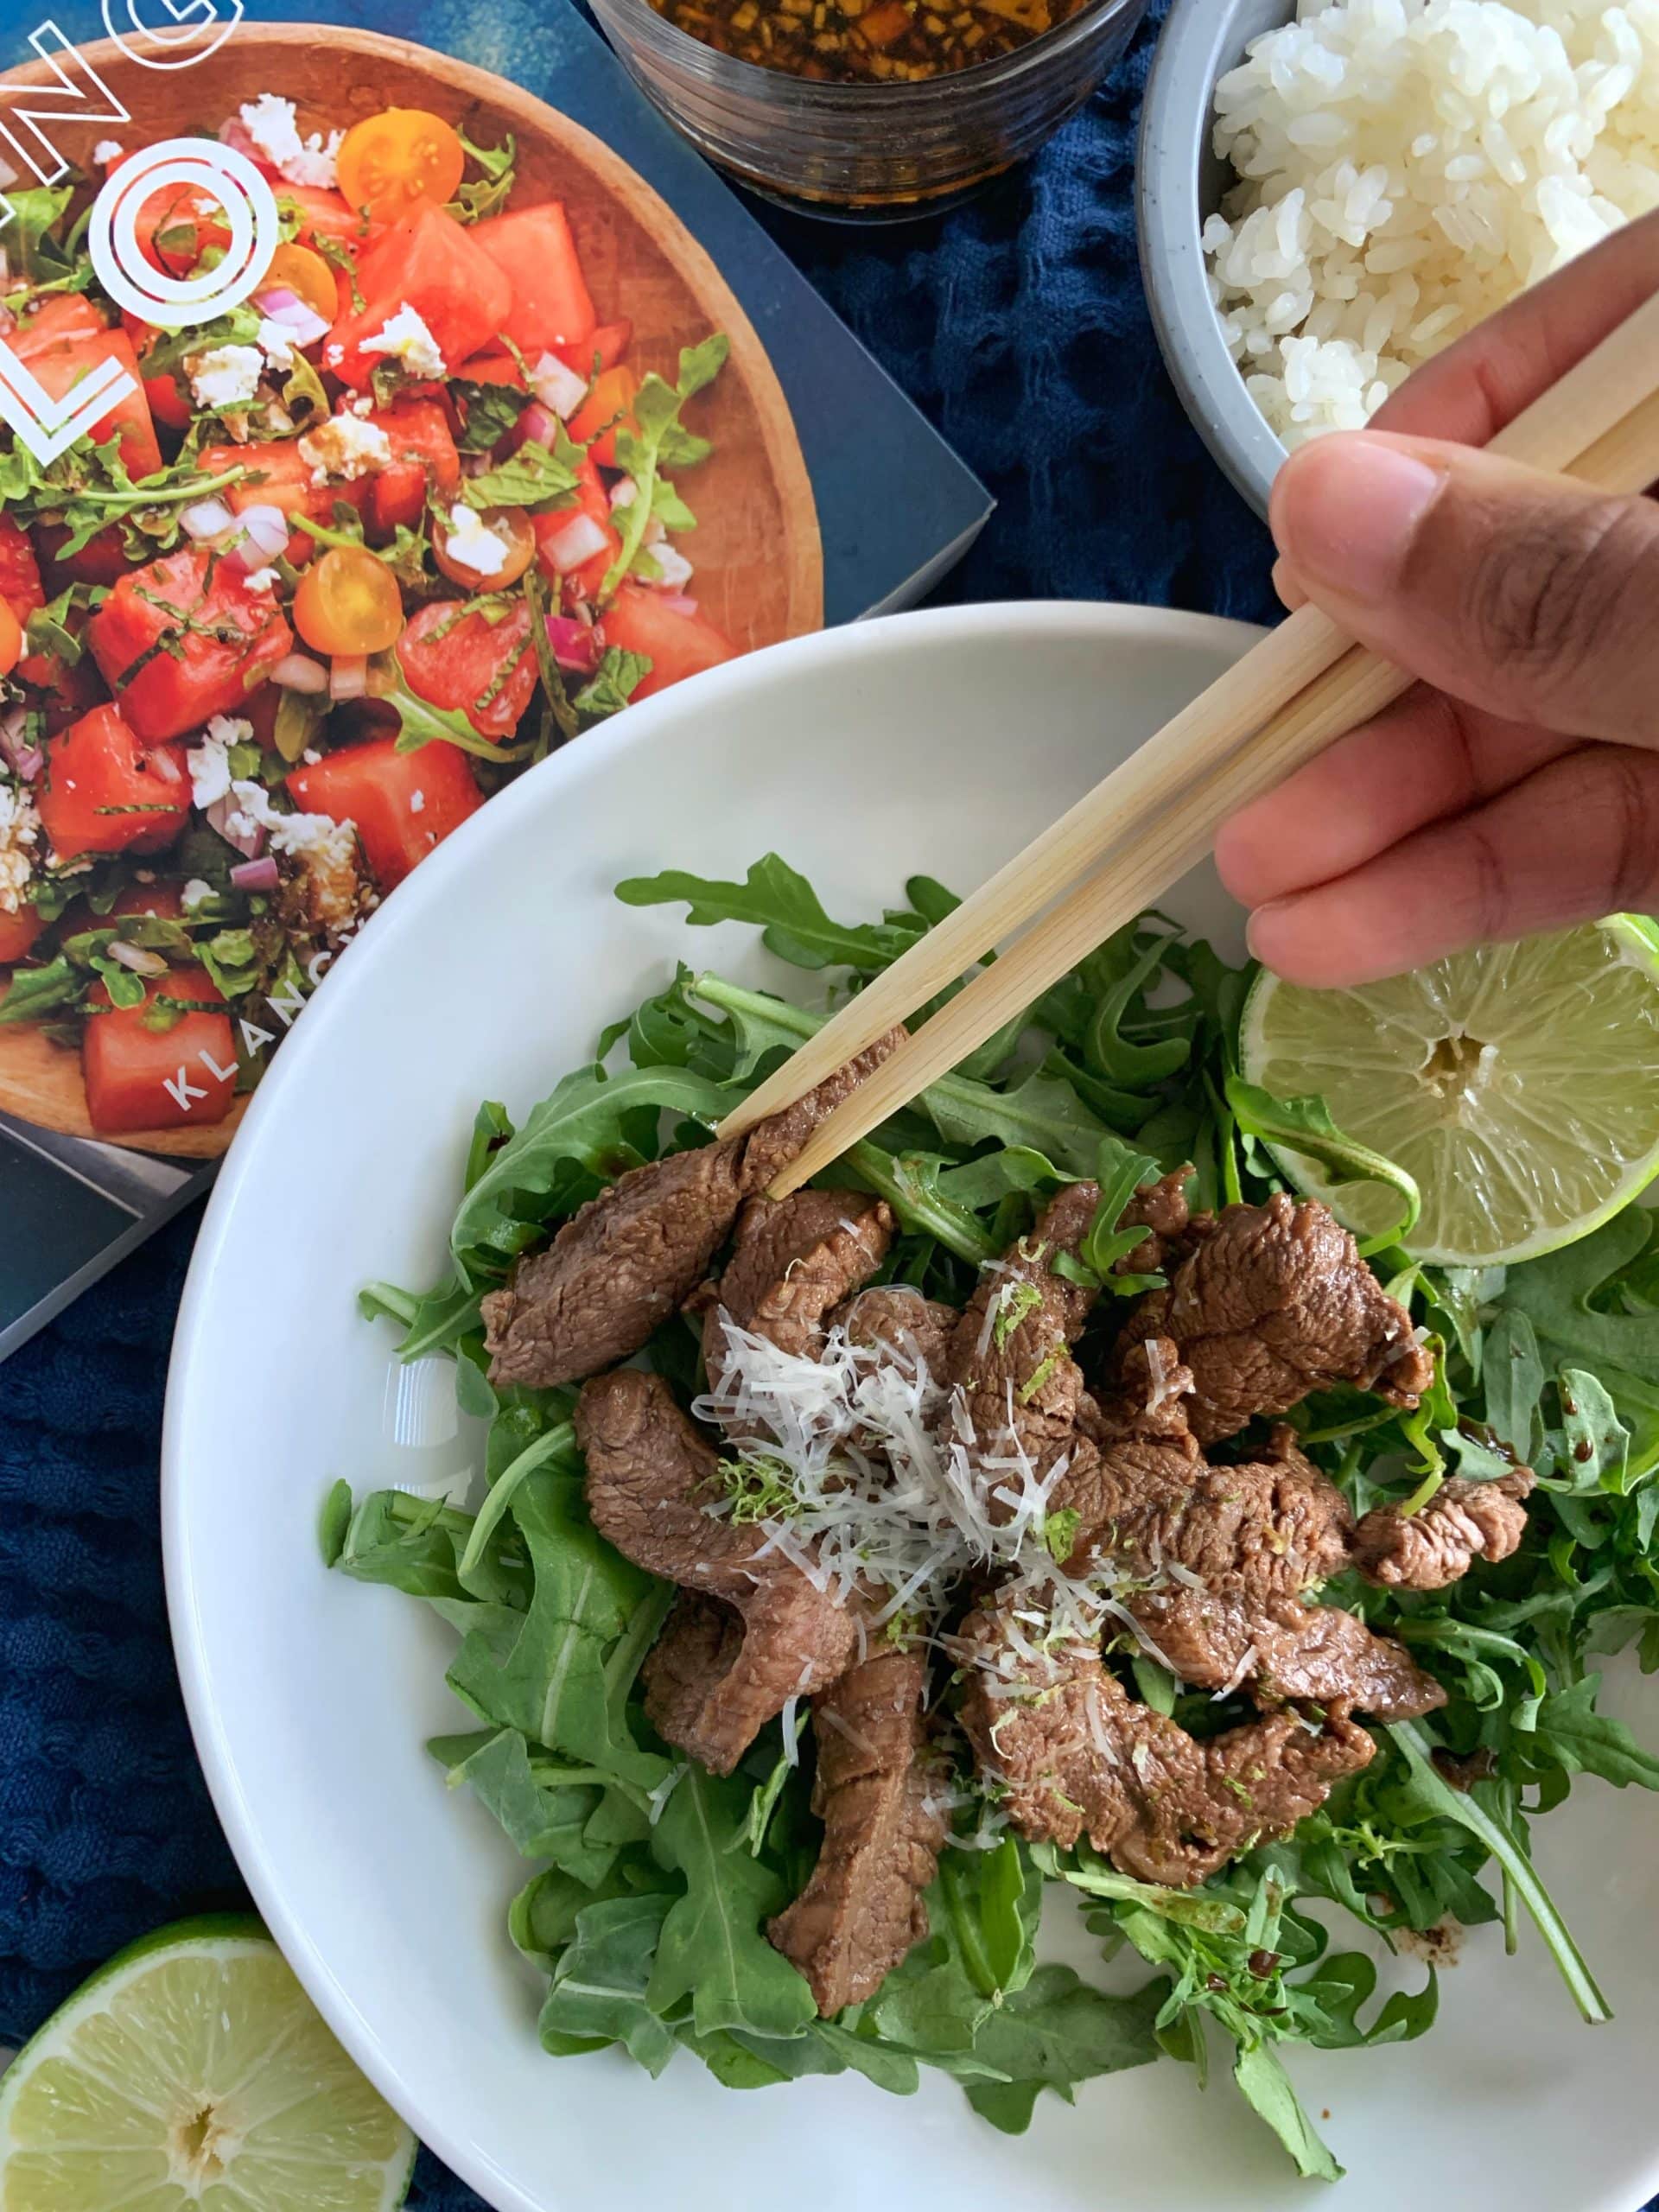 Soy-Lime Beef Stir Fry served over Arugula with Cooking Solo cookbook in the background.